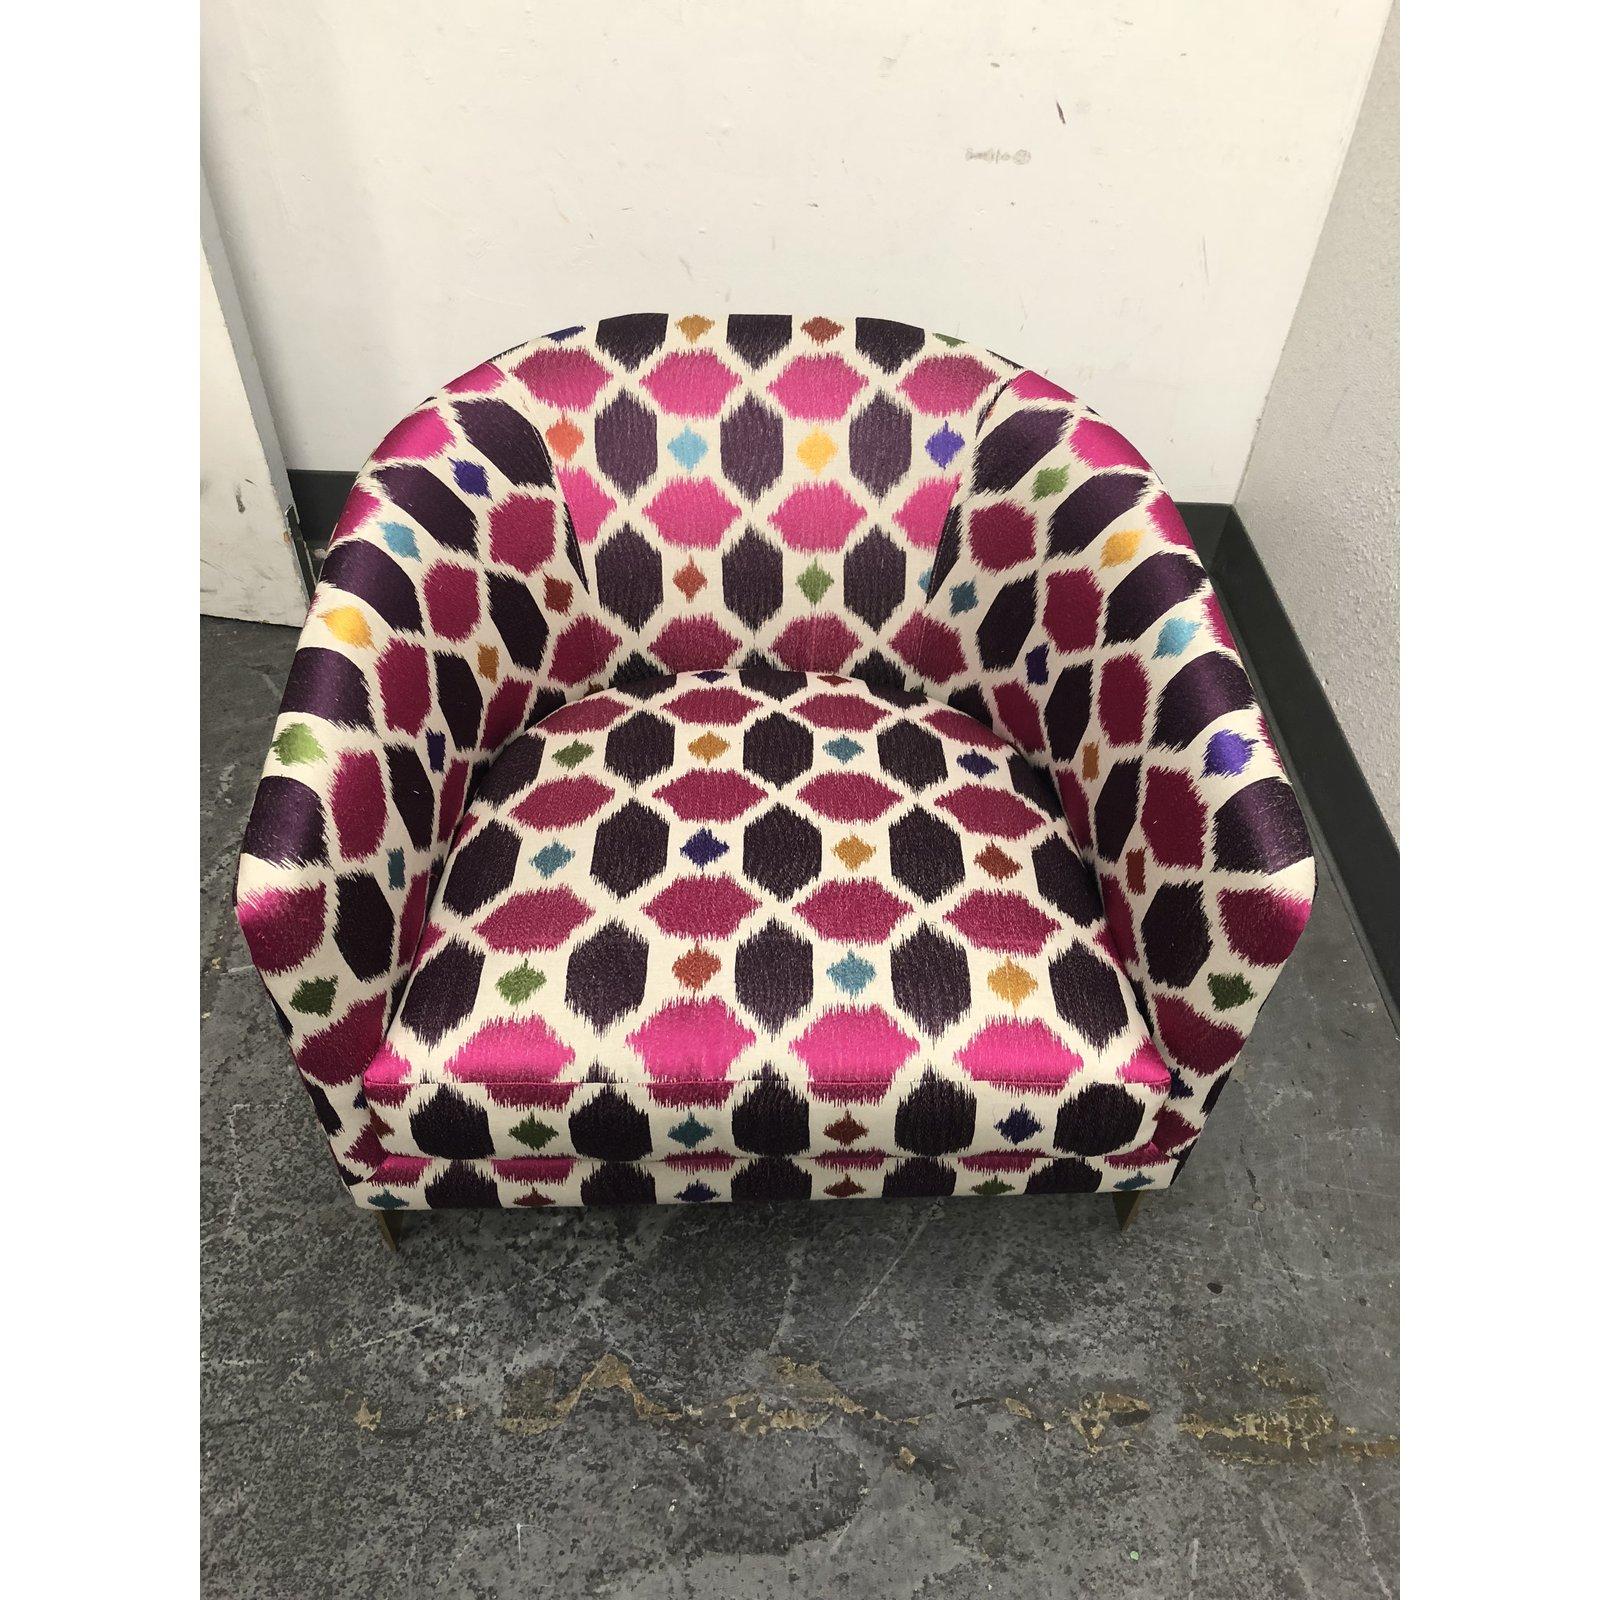 Nathan Anthony Korz Chair by Tina Nicole and Kravet Fabric (Regency) im Angebot